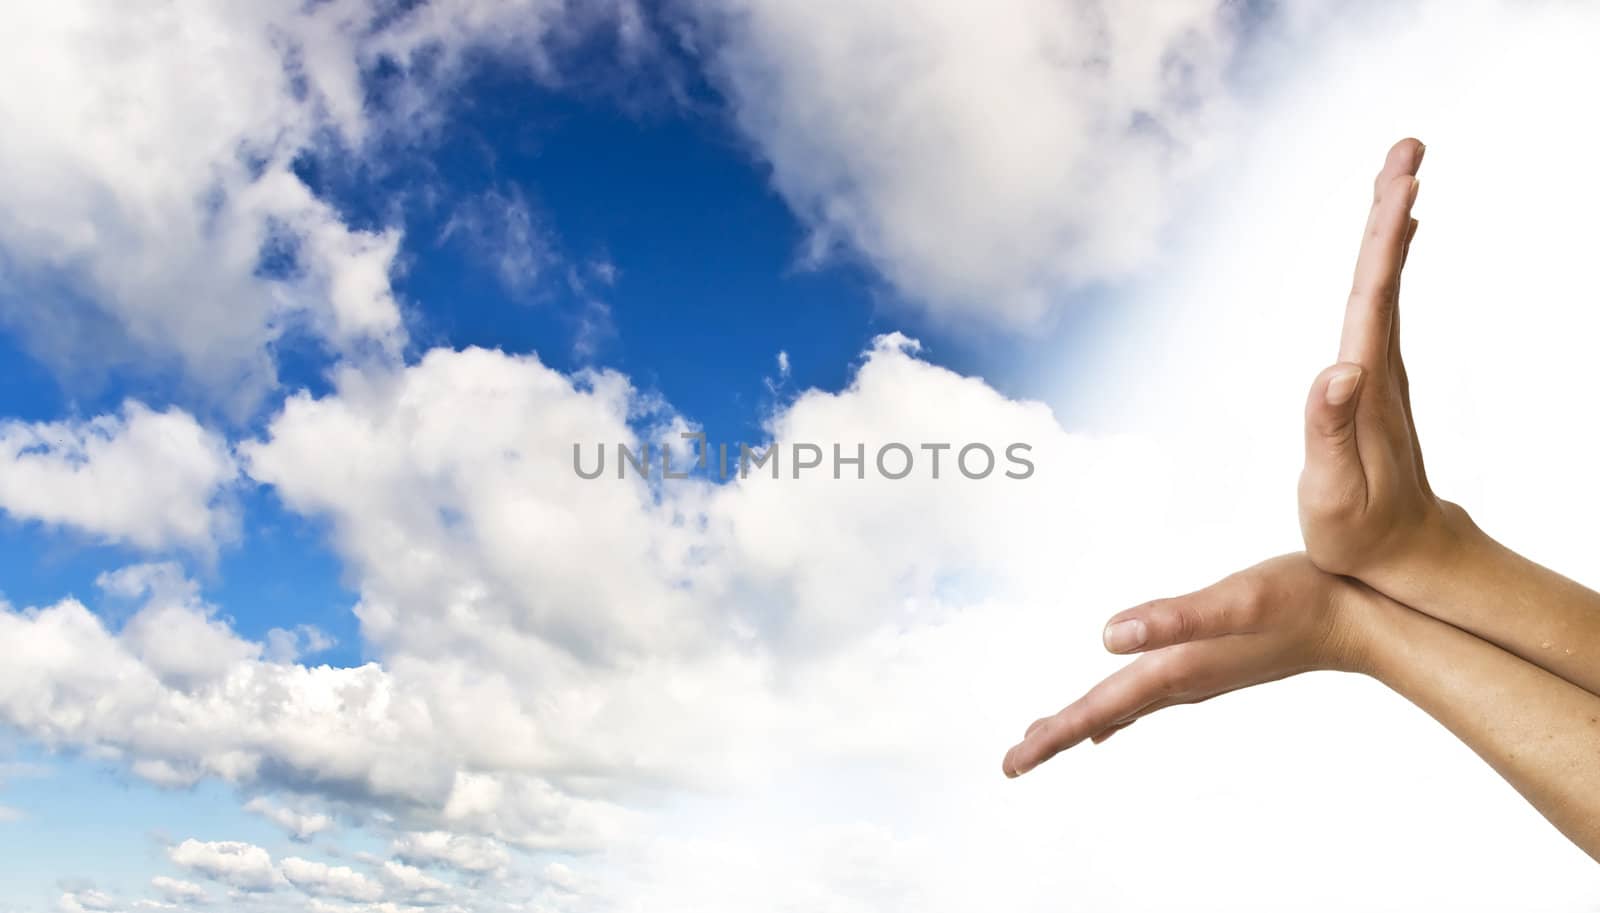 Hands on blue sky background. Women's hands supporting the blue clear sky.